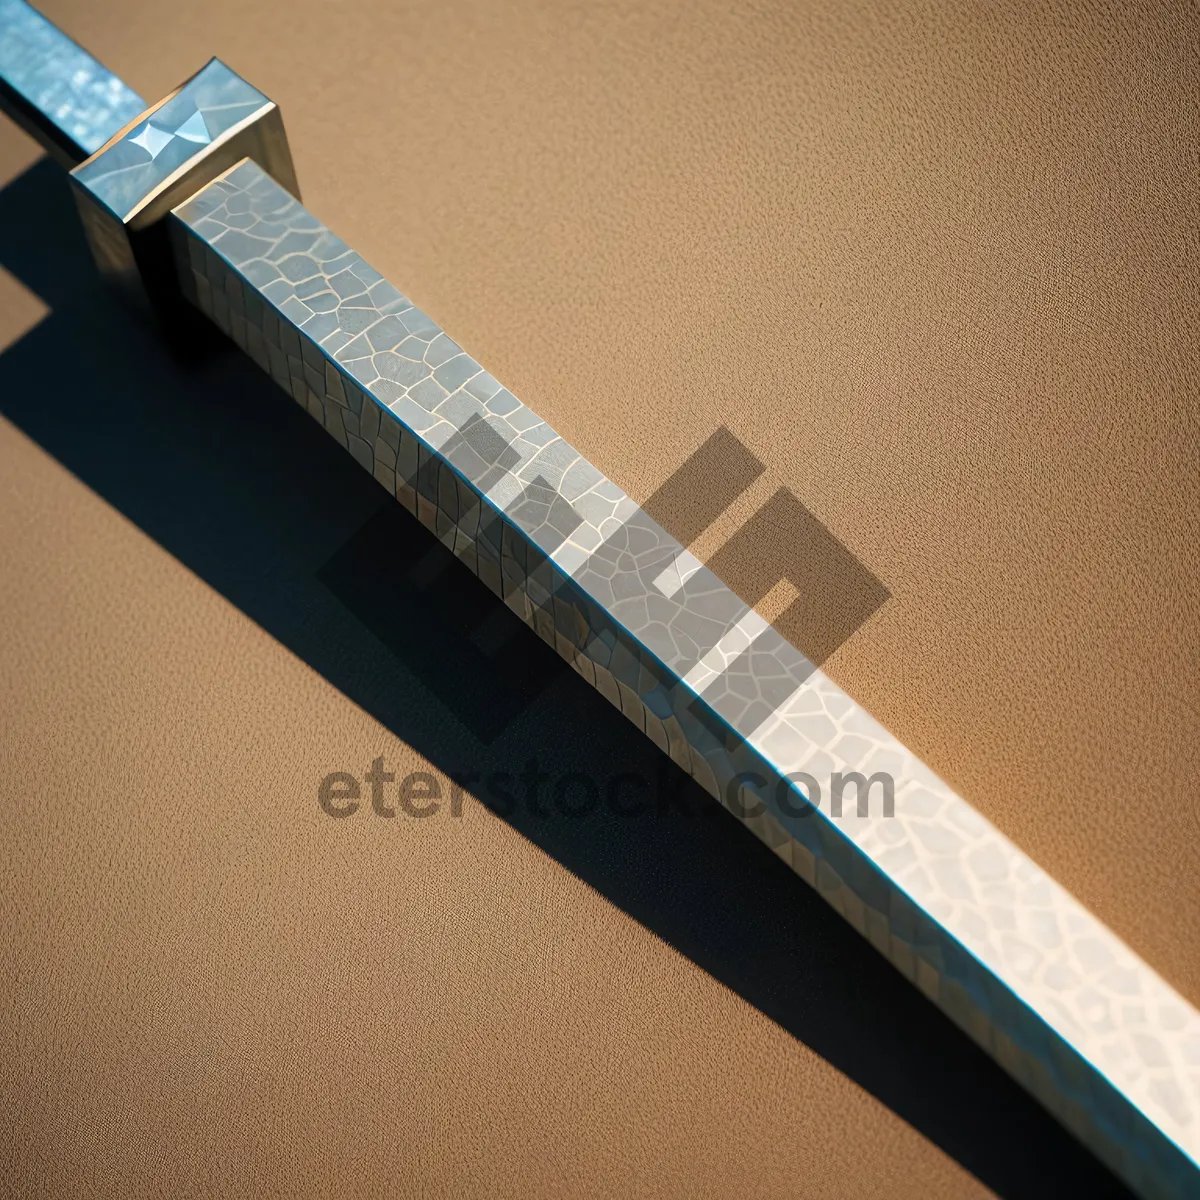 Picture of Steel Dagger with Sheath: Deadly Weapon in Metal